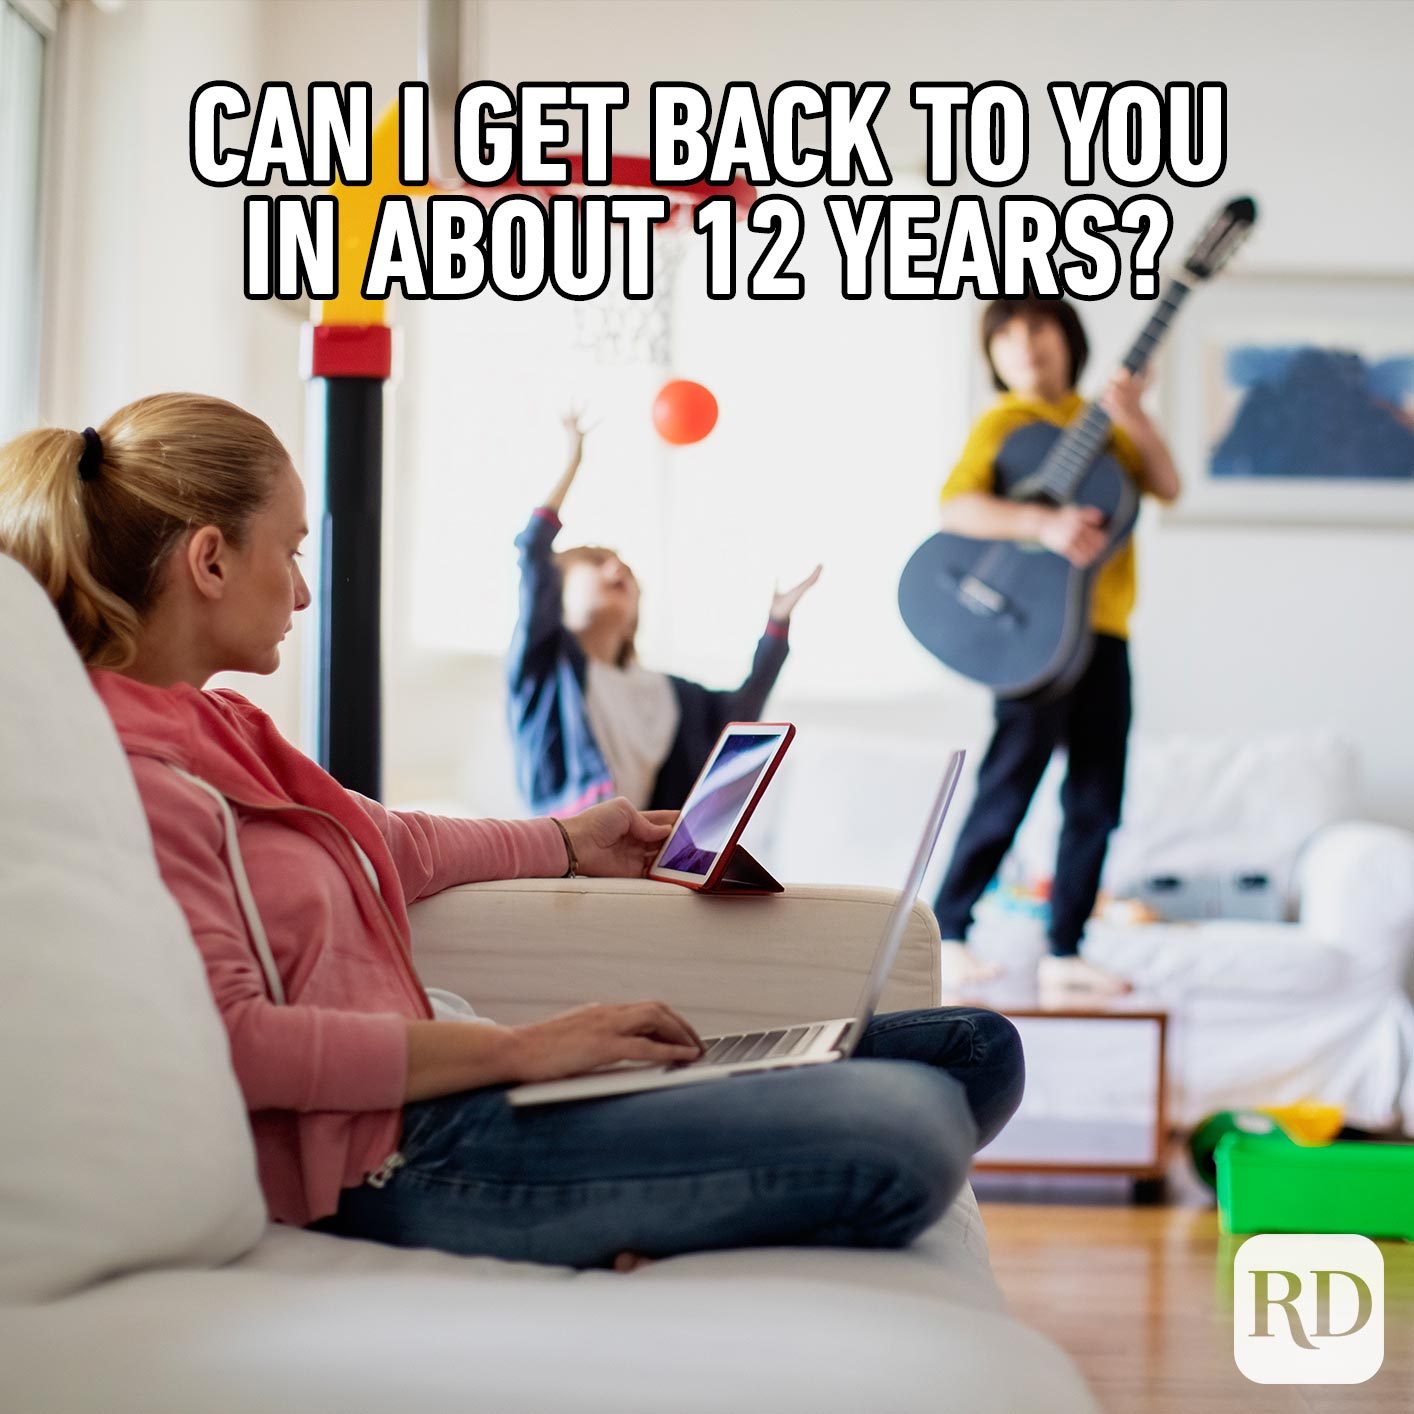 Mother on laptop while children play electric guitar and basketball behind her. MEME TEXT: Can I get back to you in about 12 years?